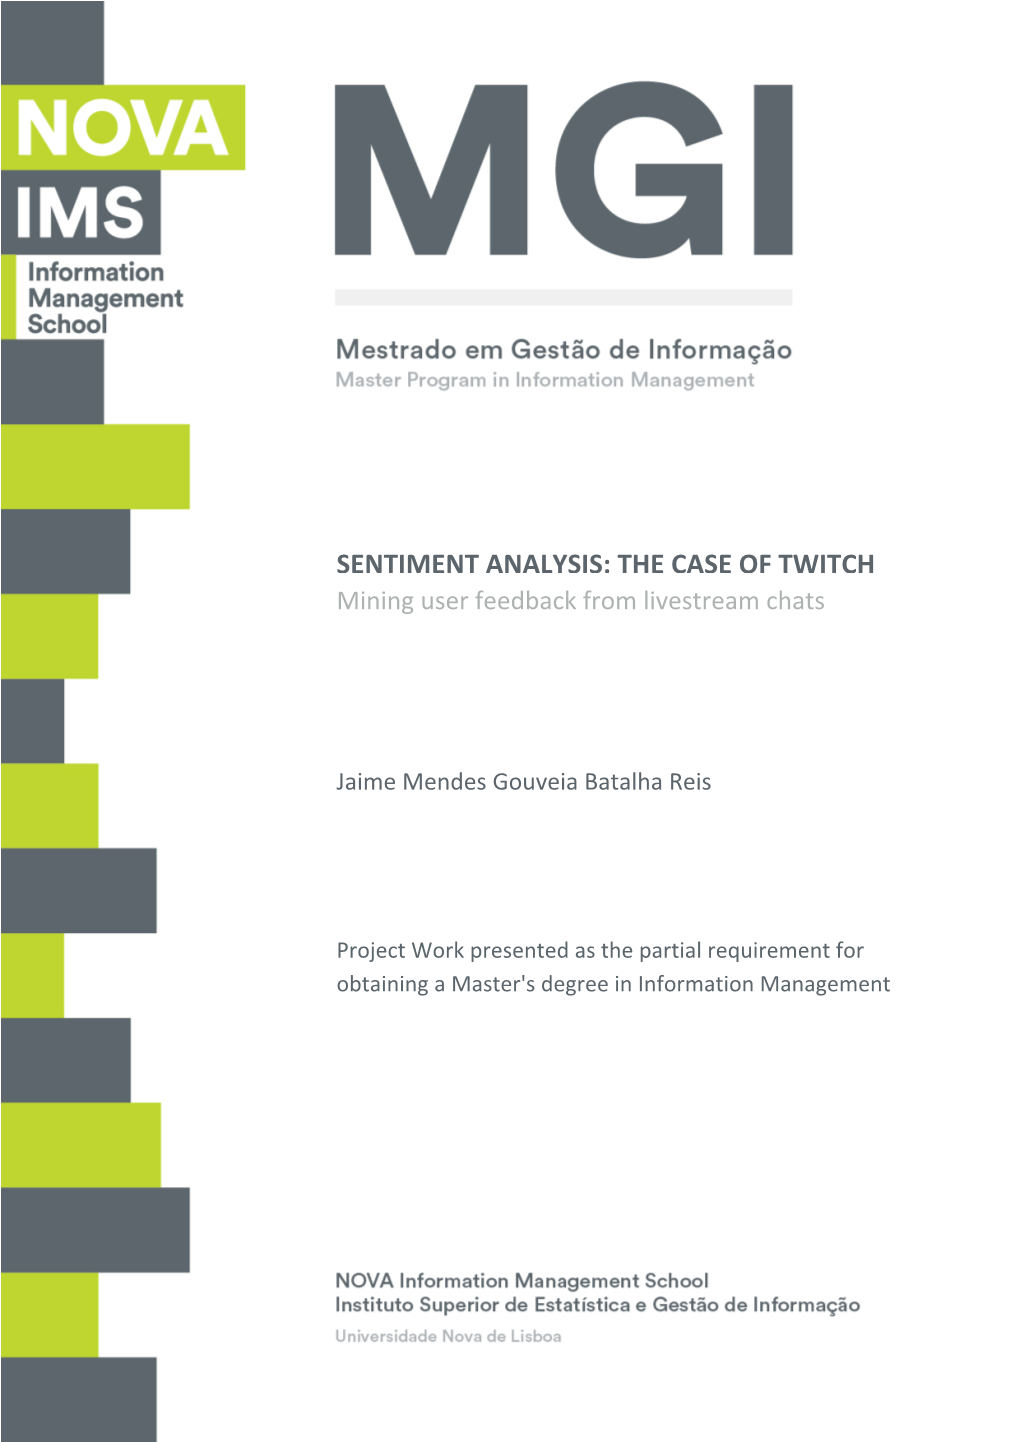 Sentiment Analysis: the Case of Twitch